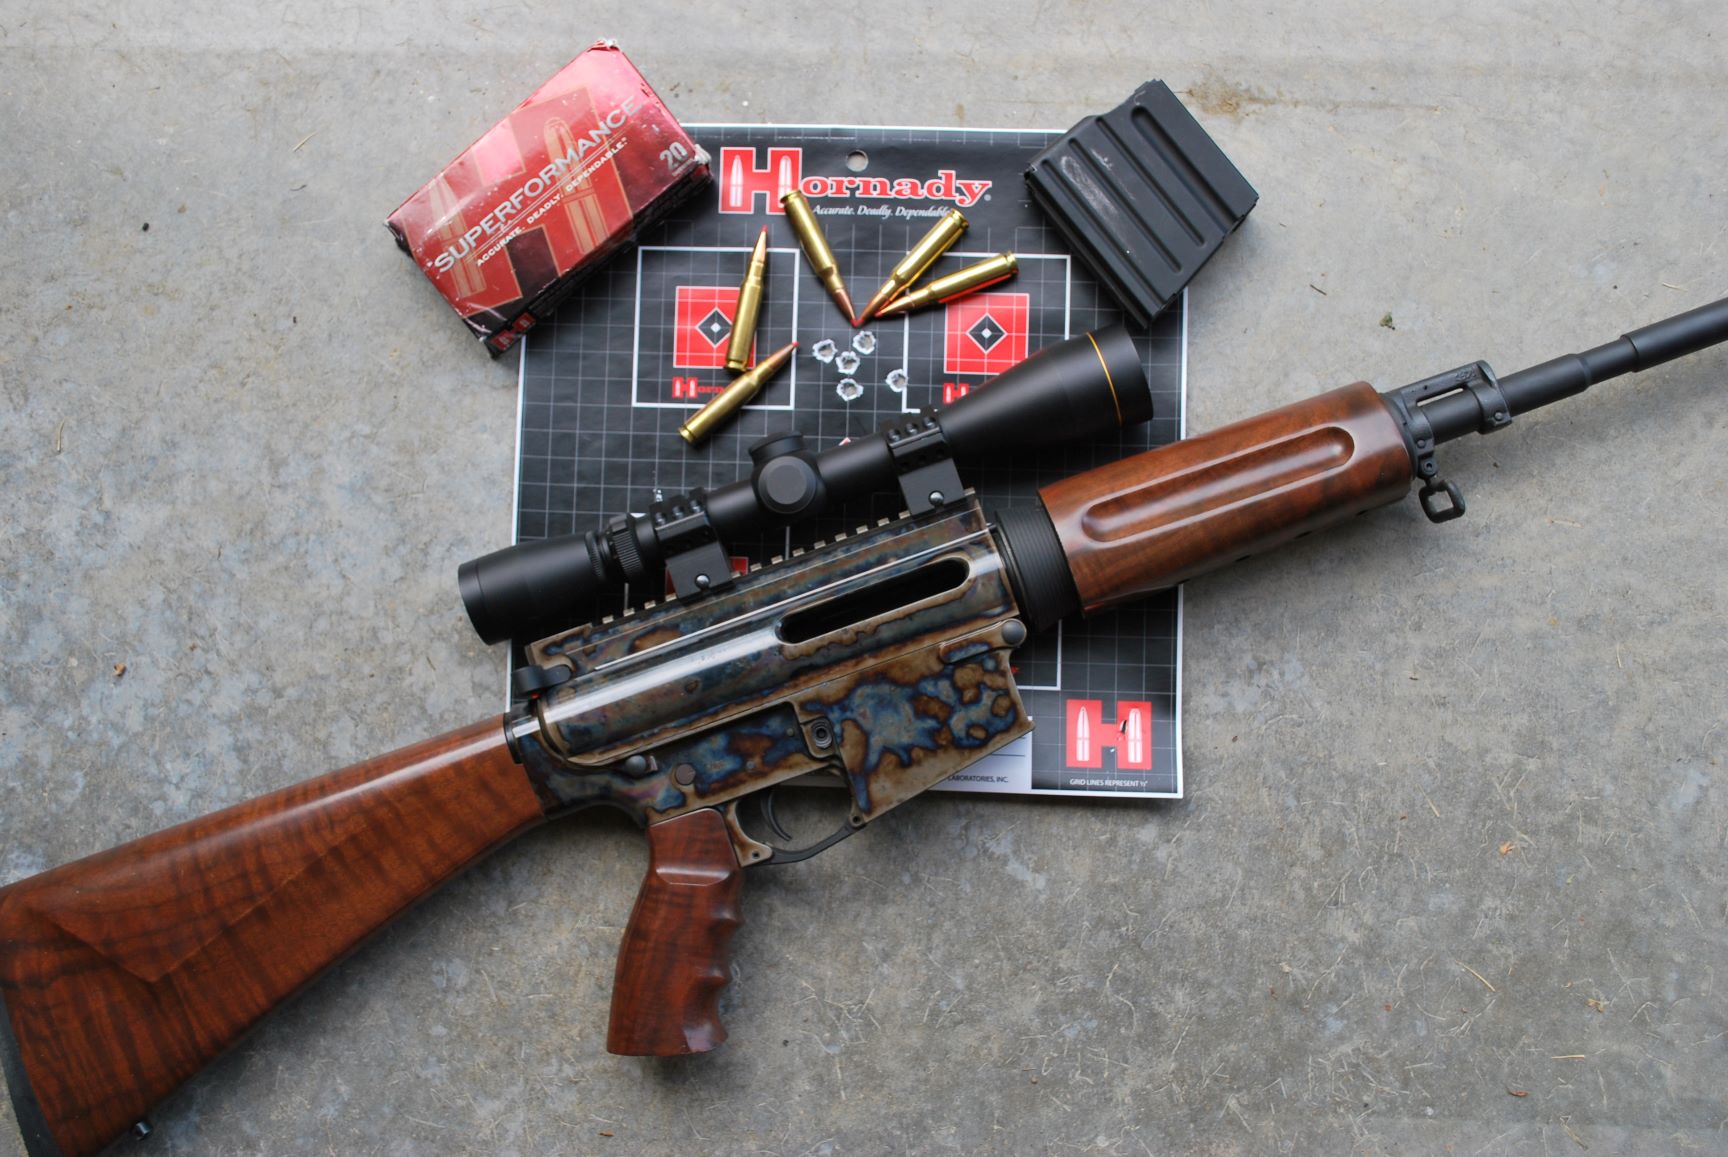 Although first introduced by Winchester as a commercial cartridge, the .308/7.62x51 NATO was designed primarily for self-loading actions. This semiautomatic AR10 was built by Doug Turnbull.